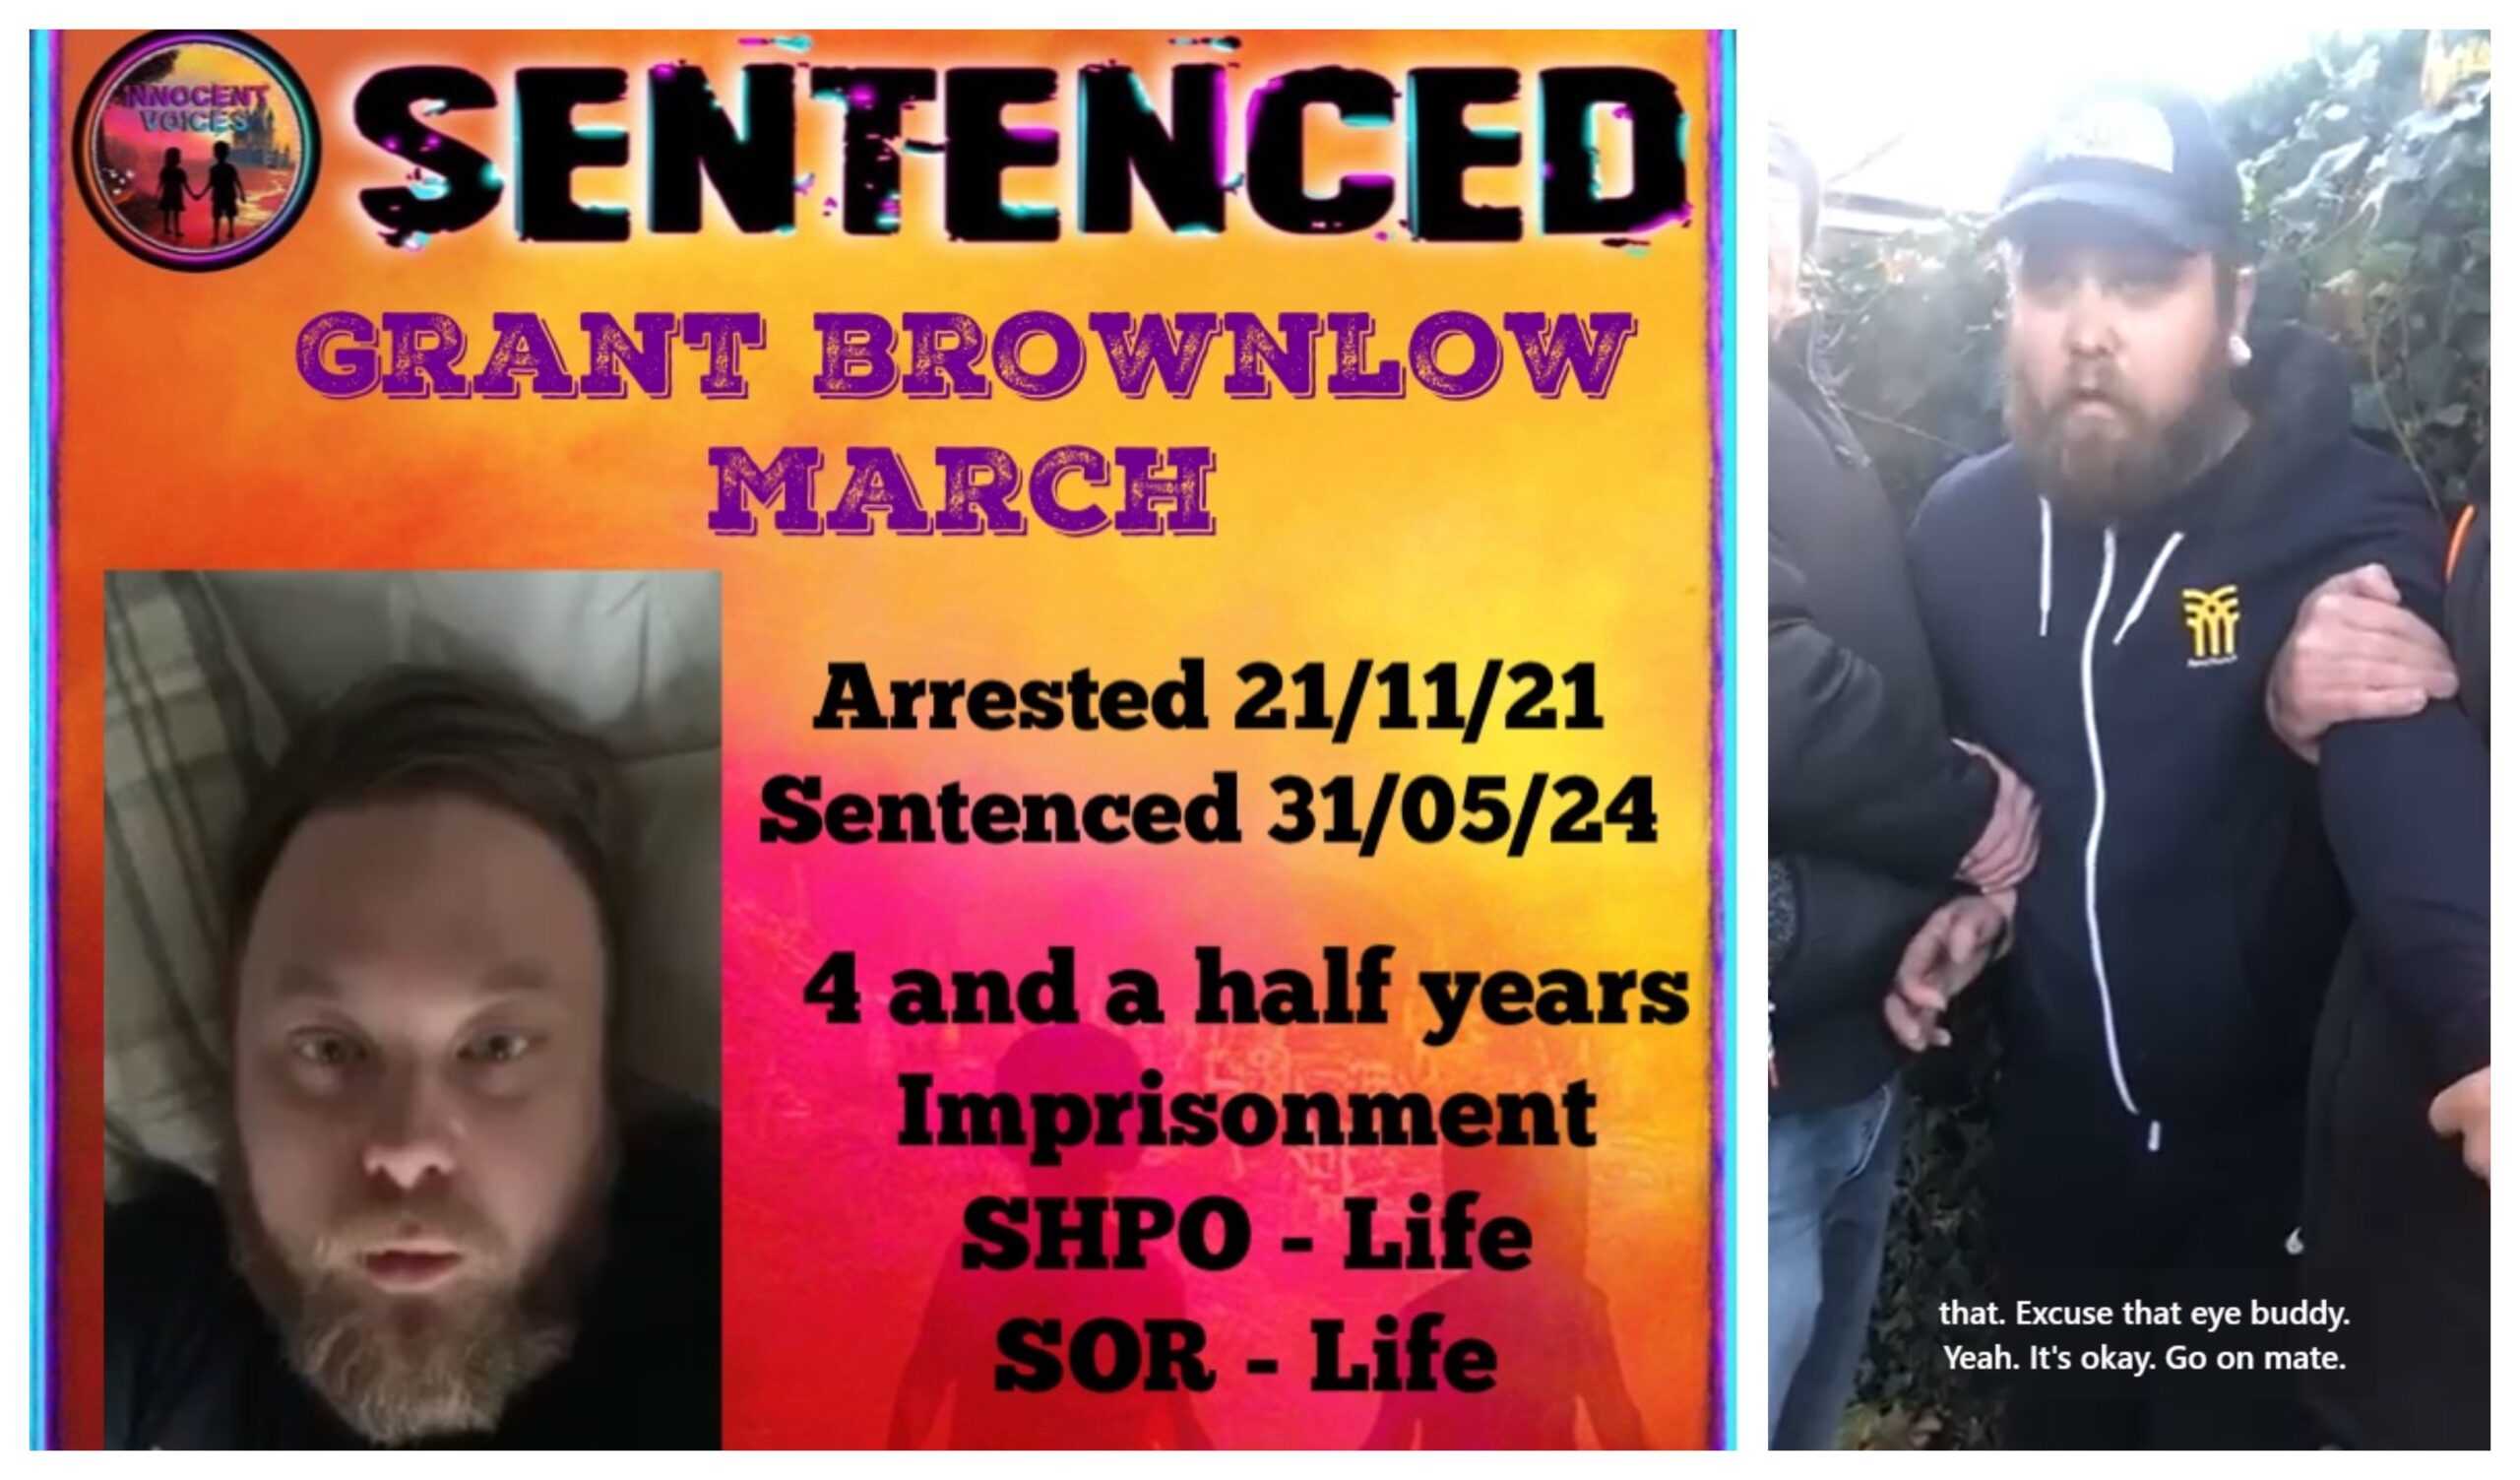 Sexual predator Grant Brownlow of March, Cambridgeshire, was jailed for four and a half years, to serve half with the remaining term on licence. He will be on the Sex Offenders Register for life and given a Sexual Harm Prevention Order.